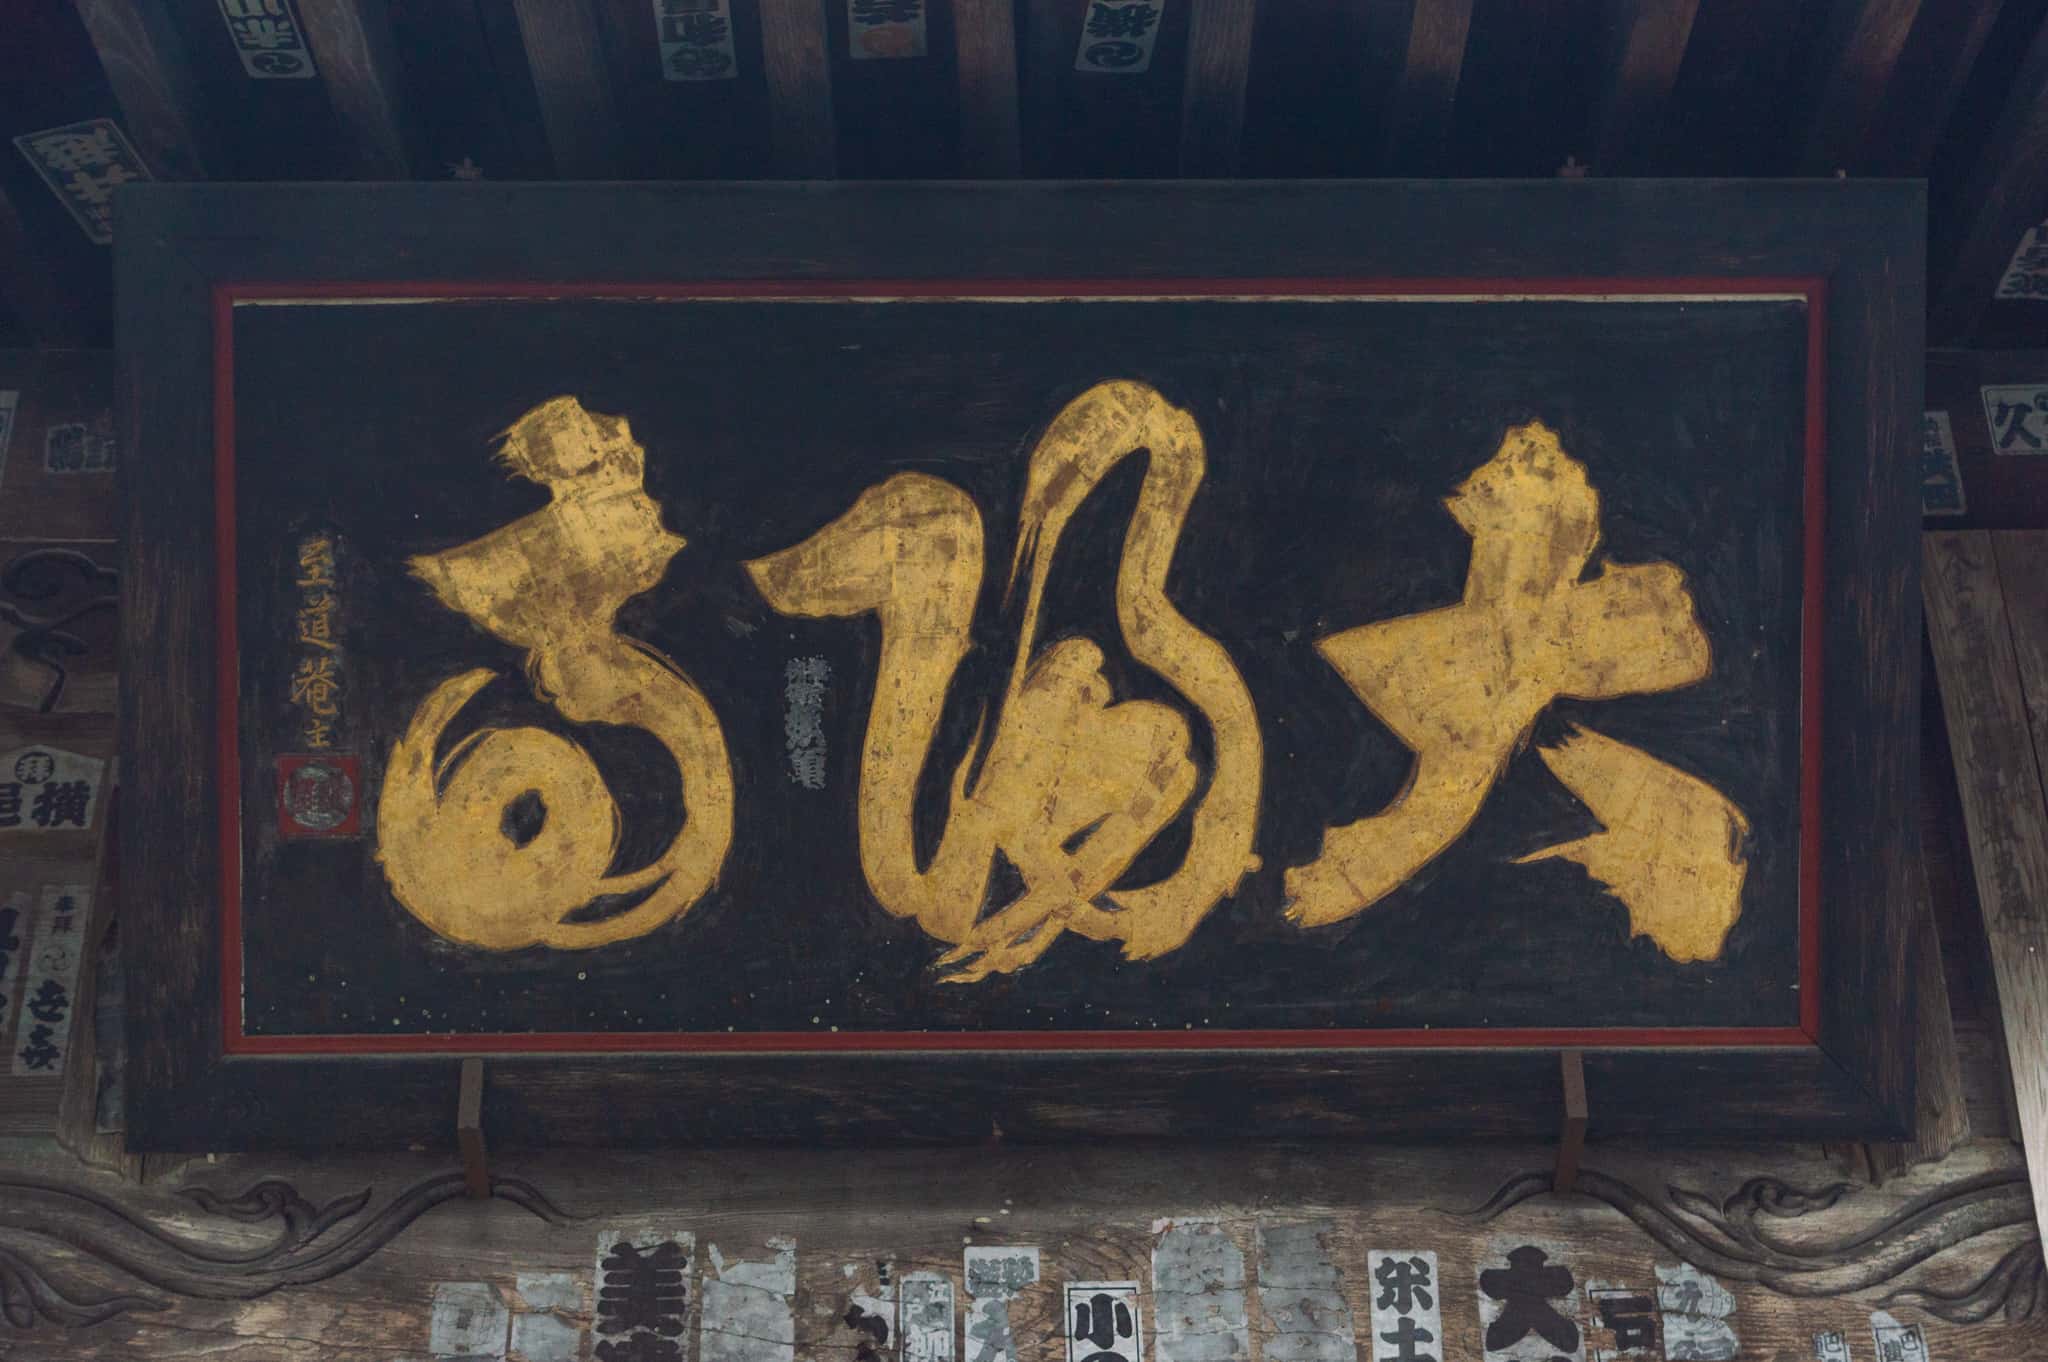 This is the front sign above the main entrance to Taiyoji Temple